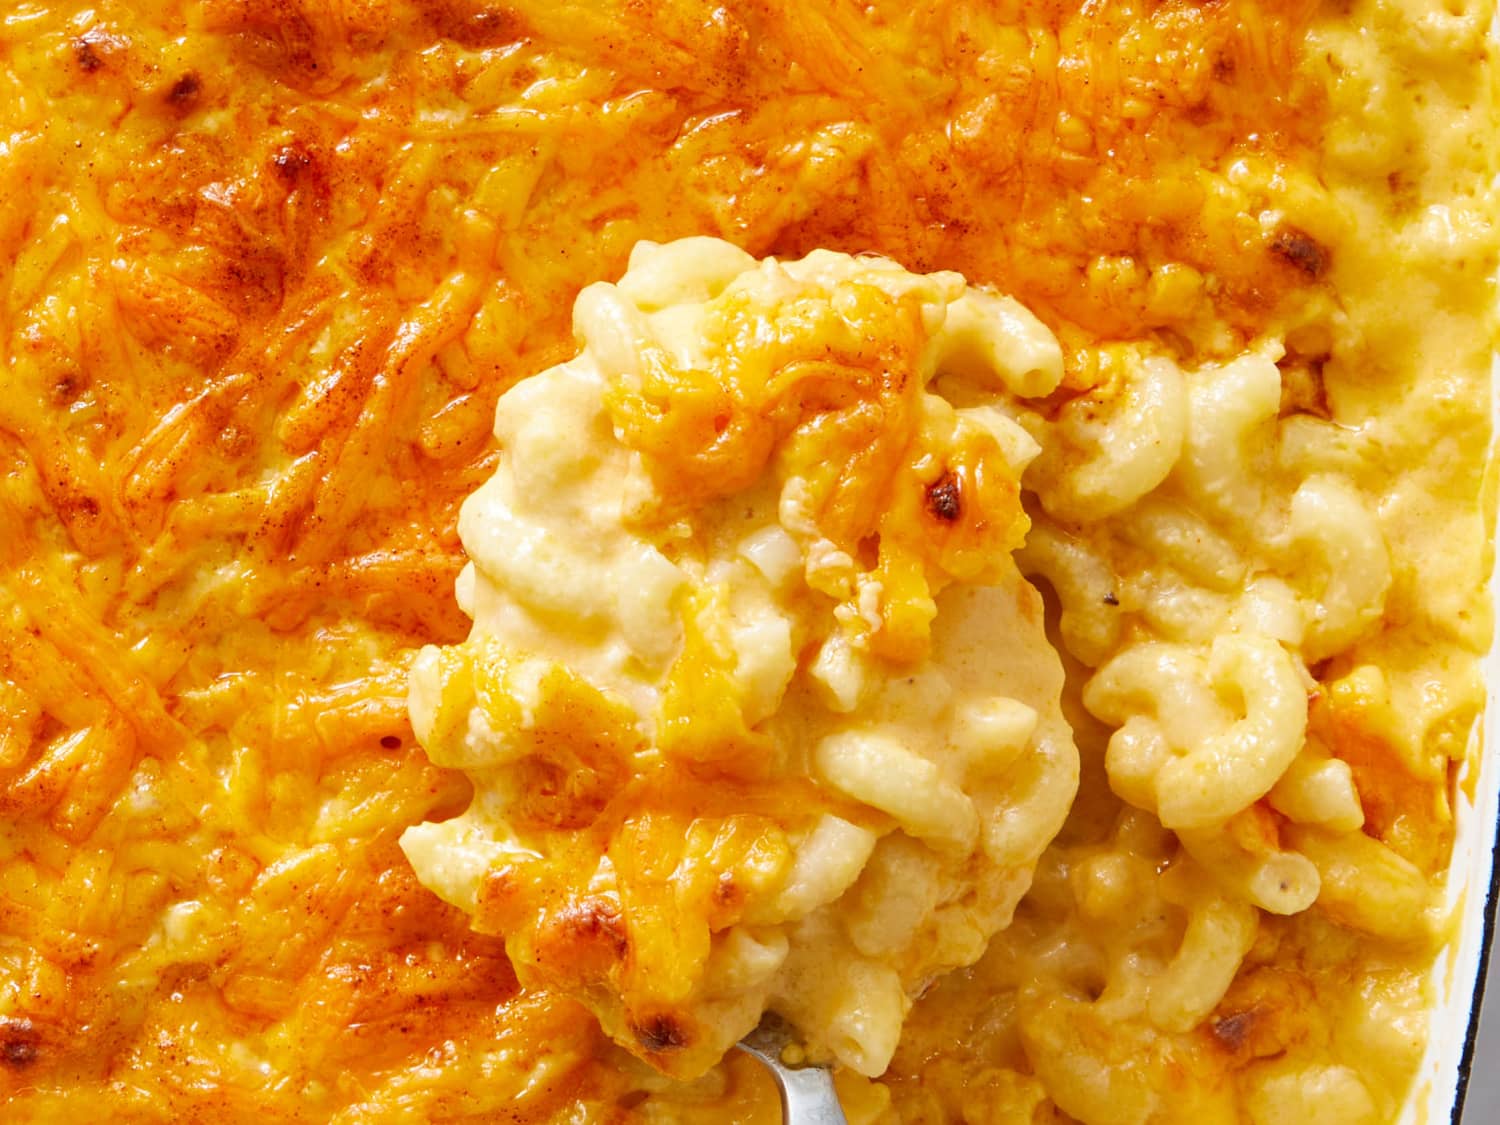 https://cdn.apartmenttherapy.info/image/upload/f_jpg,q_auto:eco,c_fill,g_auto,w_1500,ar_4:3/k%2FPhoto%2FRecipes%2F2023-10-classic-baked-mac-and-cheese%2Fclassic-baked-mac-and-cheese-1969-2